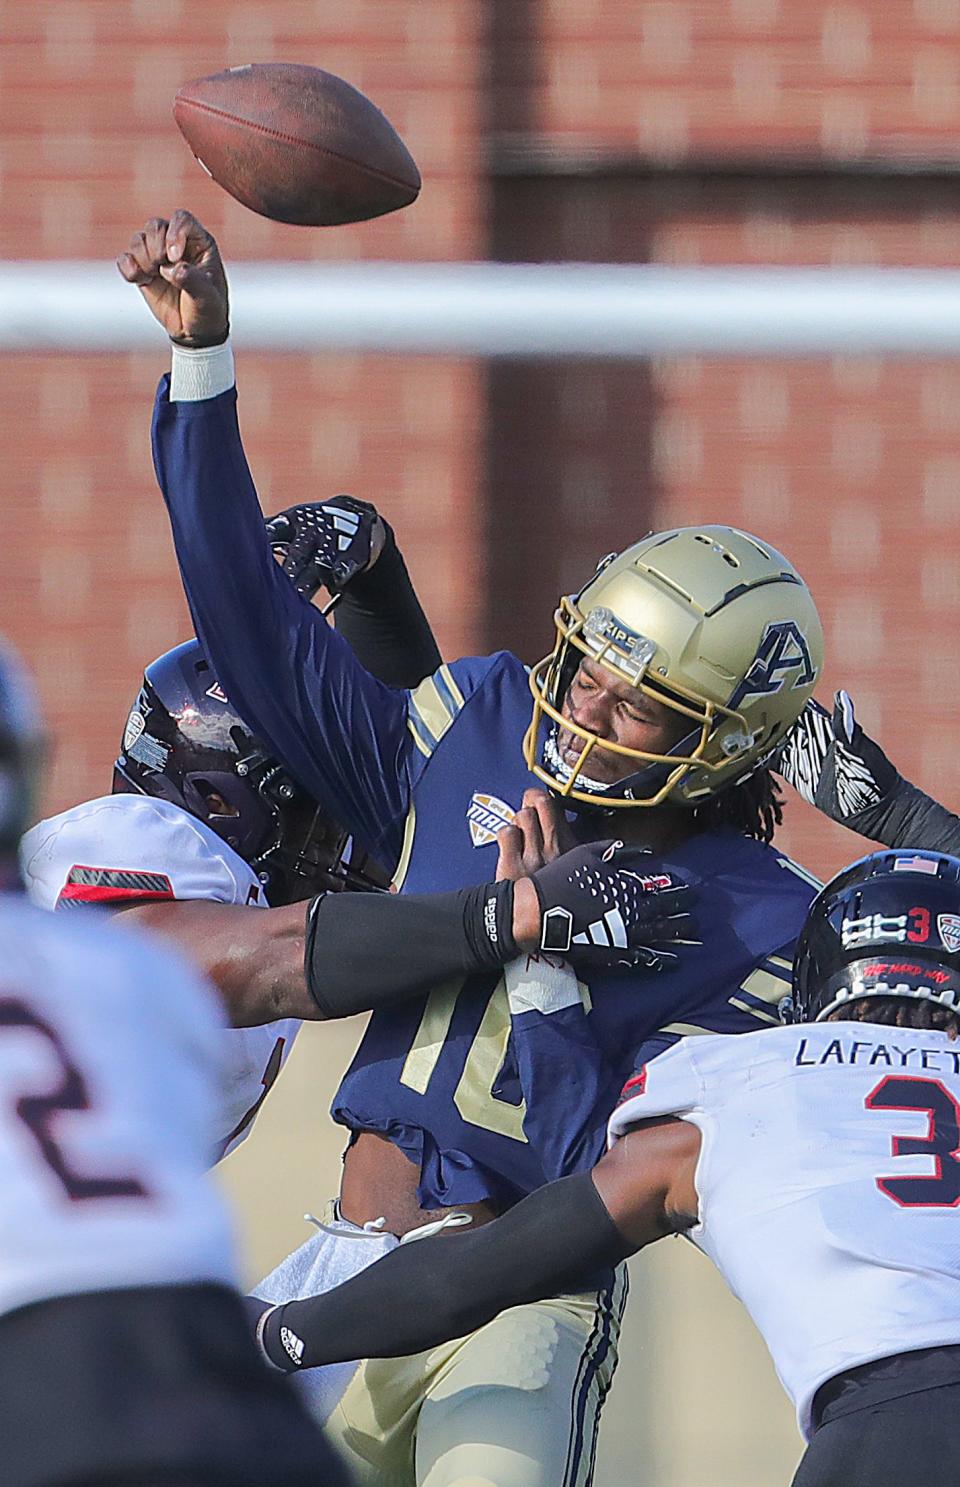 University of Akron quarterback Tahj Bullock is hit by NIU defensive tackle Devonte O'Malley during the second quarter on Saturday in Akron.